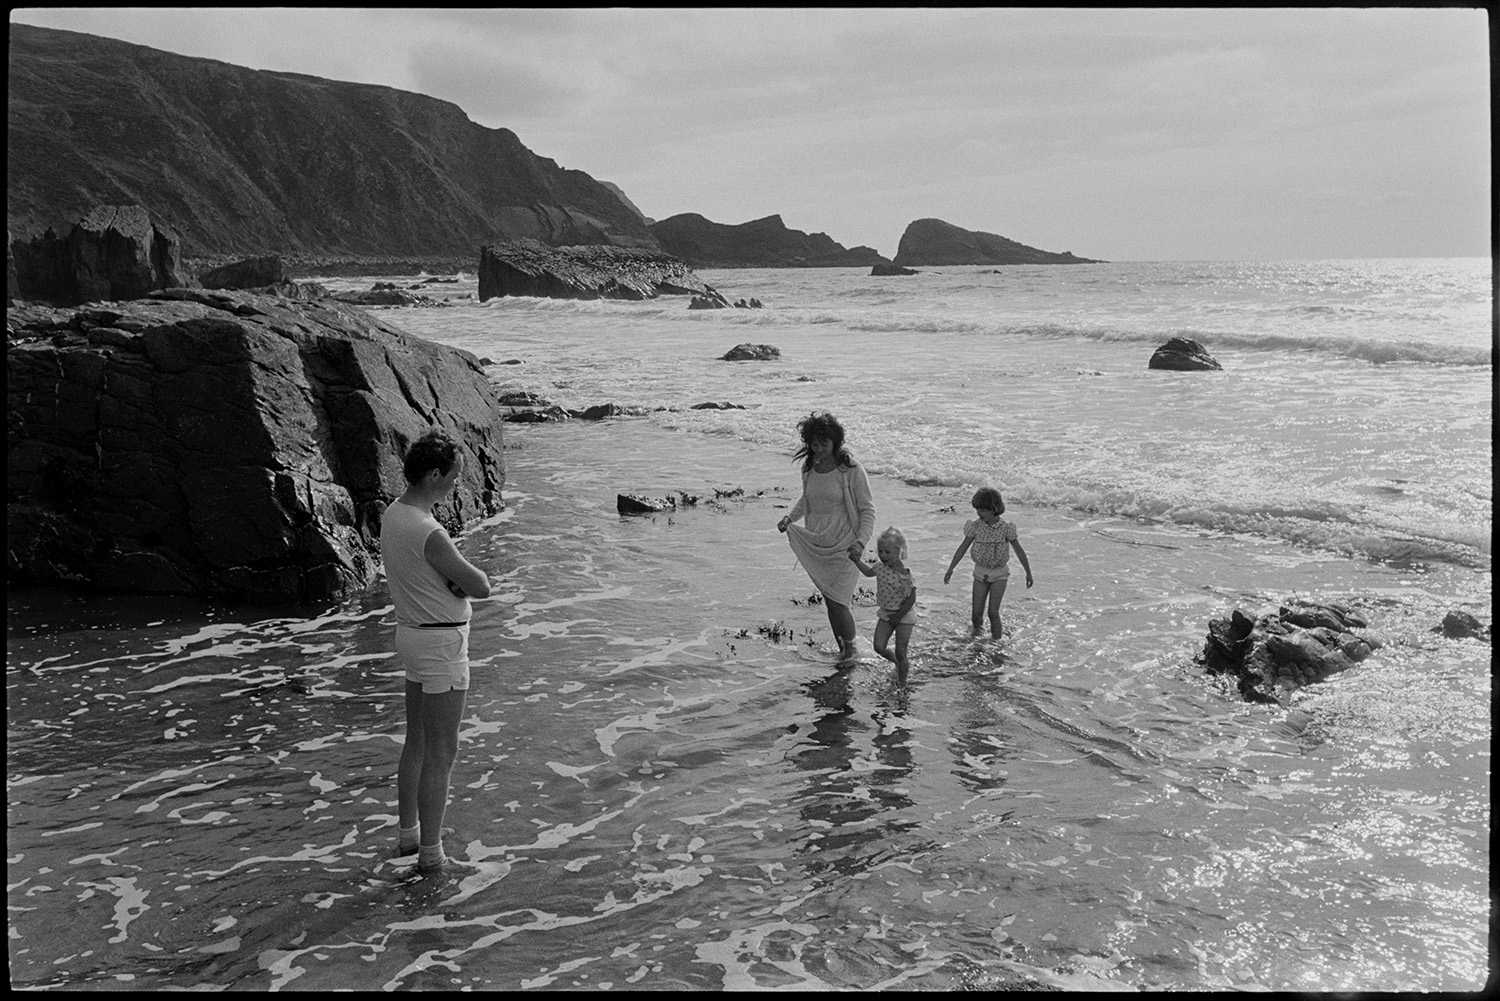 Family on seashore. 
[Carol Duncan and Peter Duncan paddling in the sea on the beach at Welcombe, with their children. The seashore and cliffs can be seen in the background.]